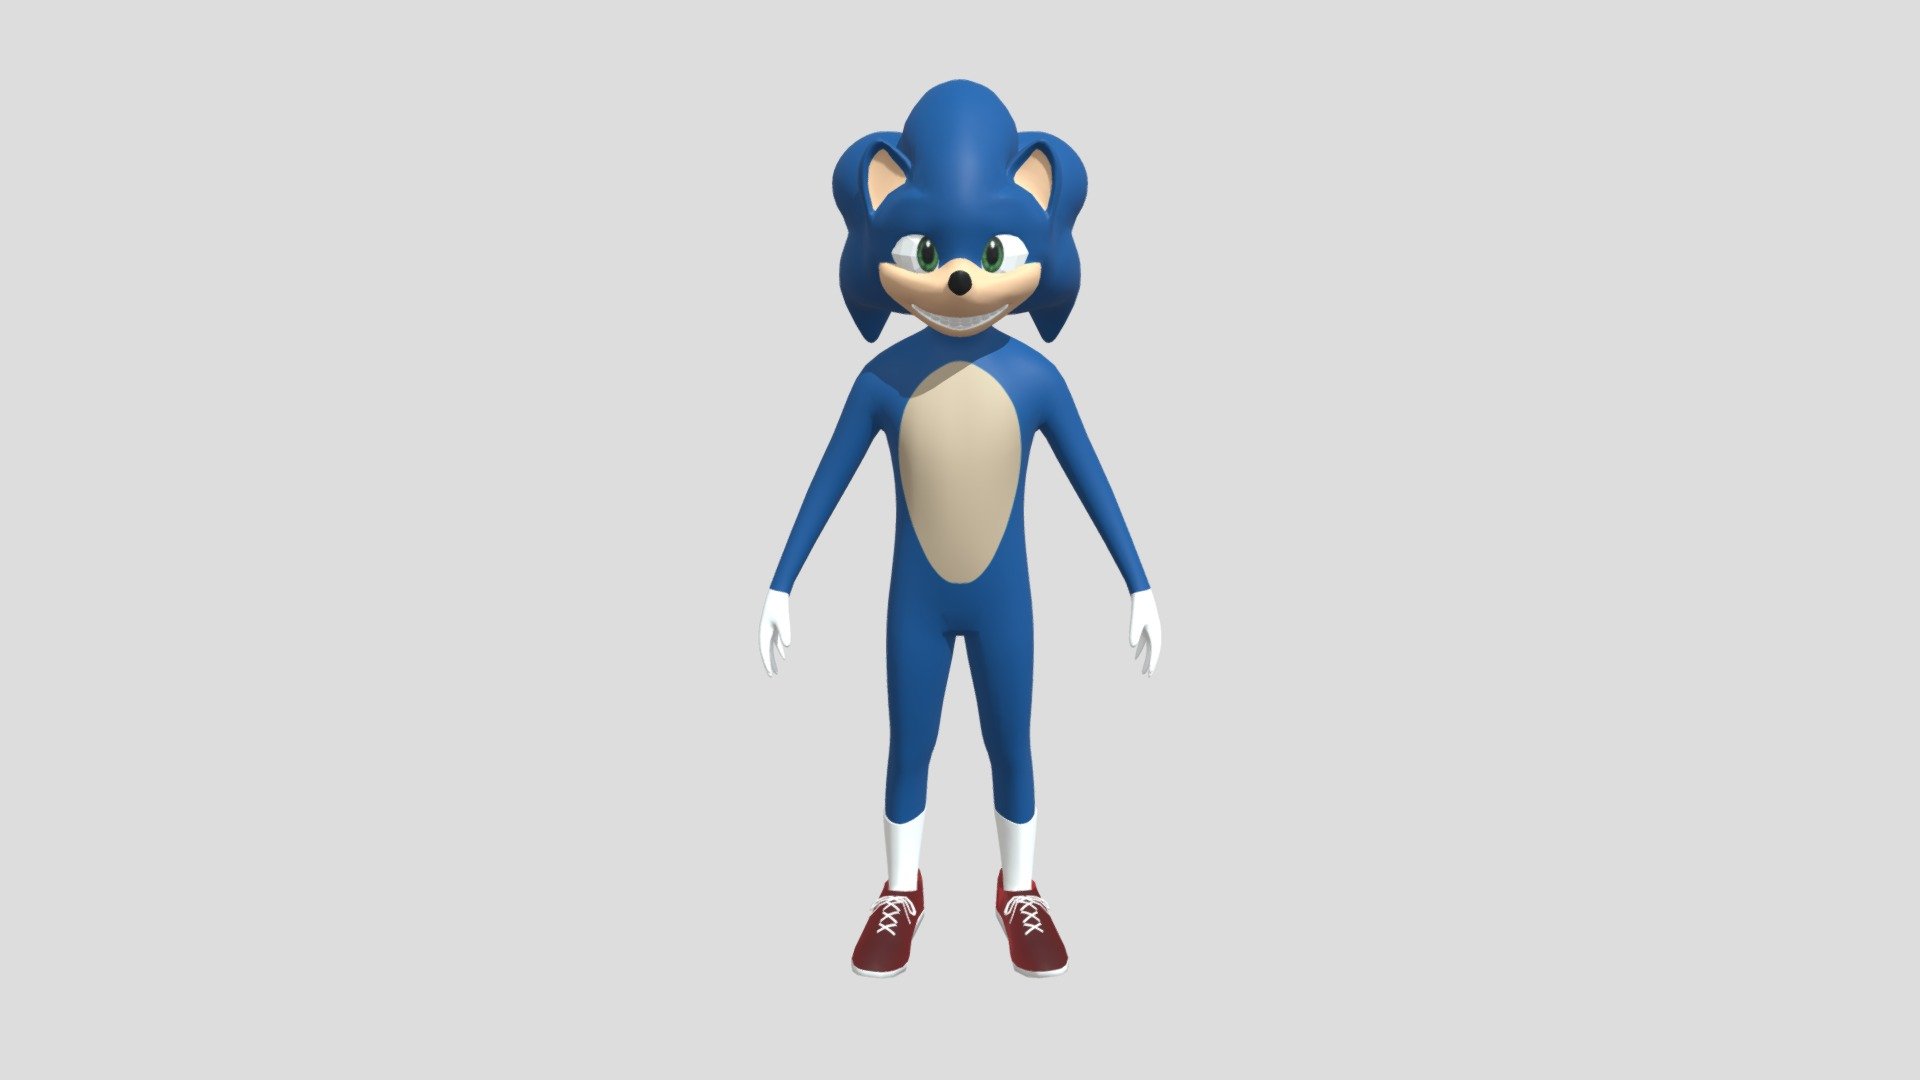 fom the most dark nigthmare we have the original movie sonic disaing                  do you remember that trailer of the movie of sonic in 2019 well that terrible sonic  is here - original movie sonic disaing - Download Free 3D model by avilezfernando2009 3d model